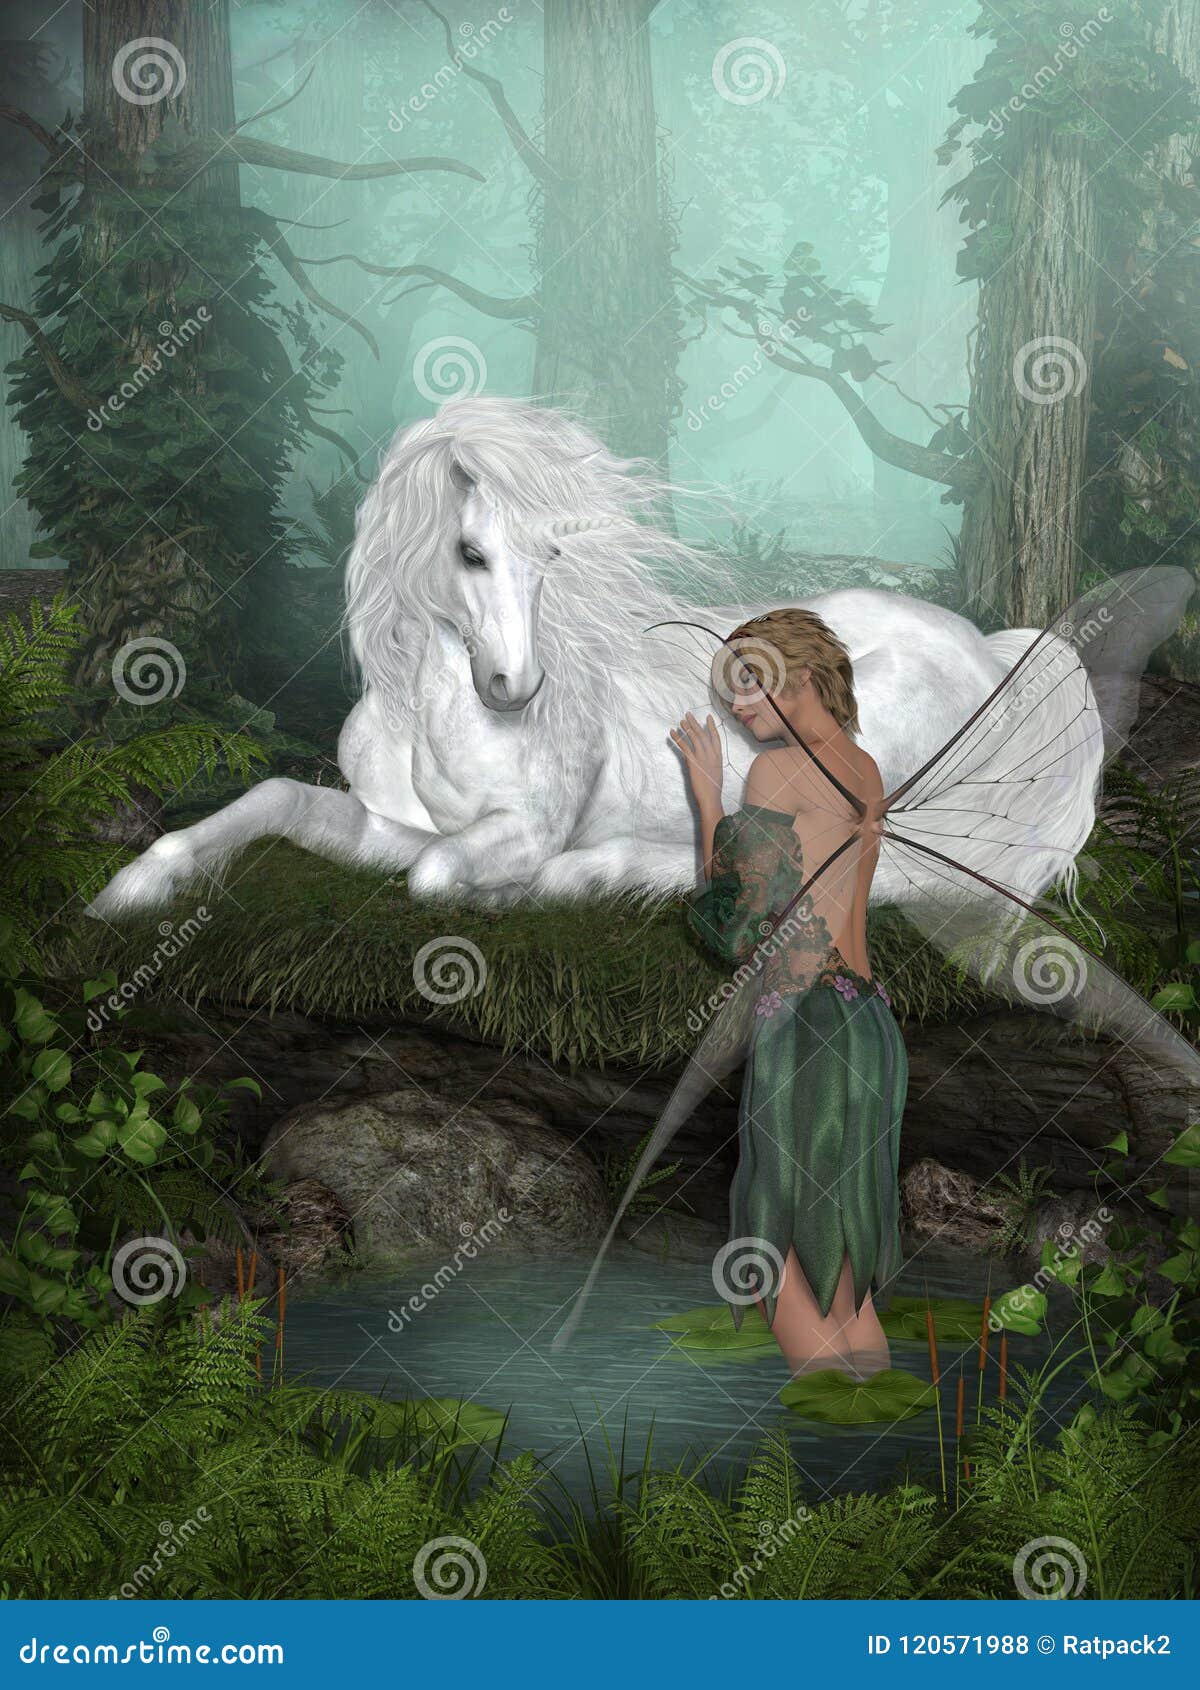 Enchanting Unicorn and Fairy in a Forest by a Pond Stock Illustration